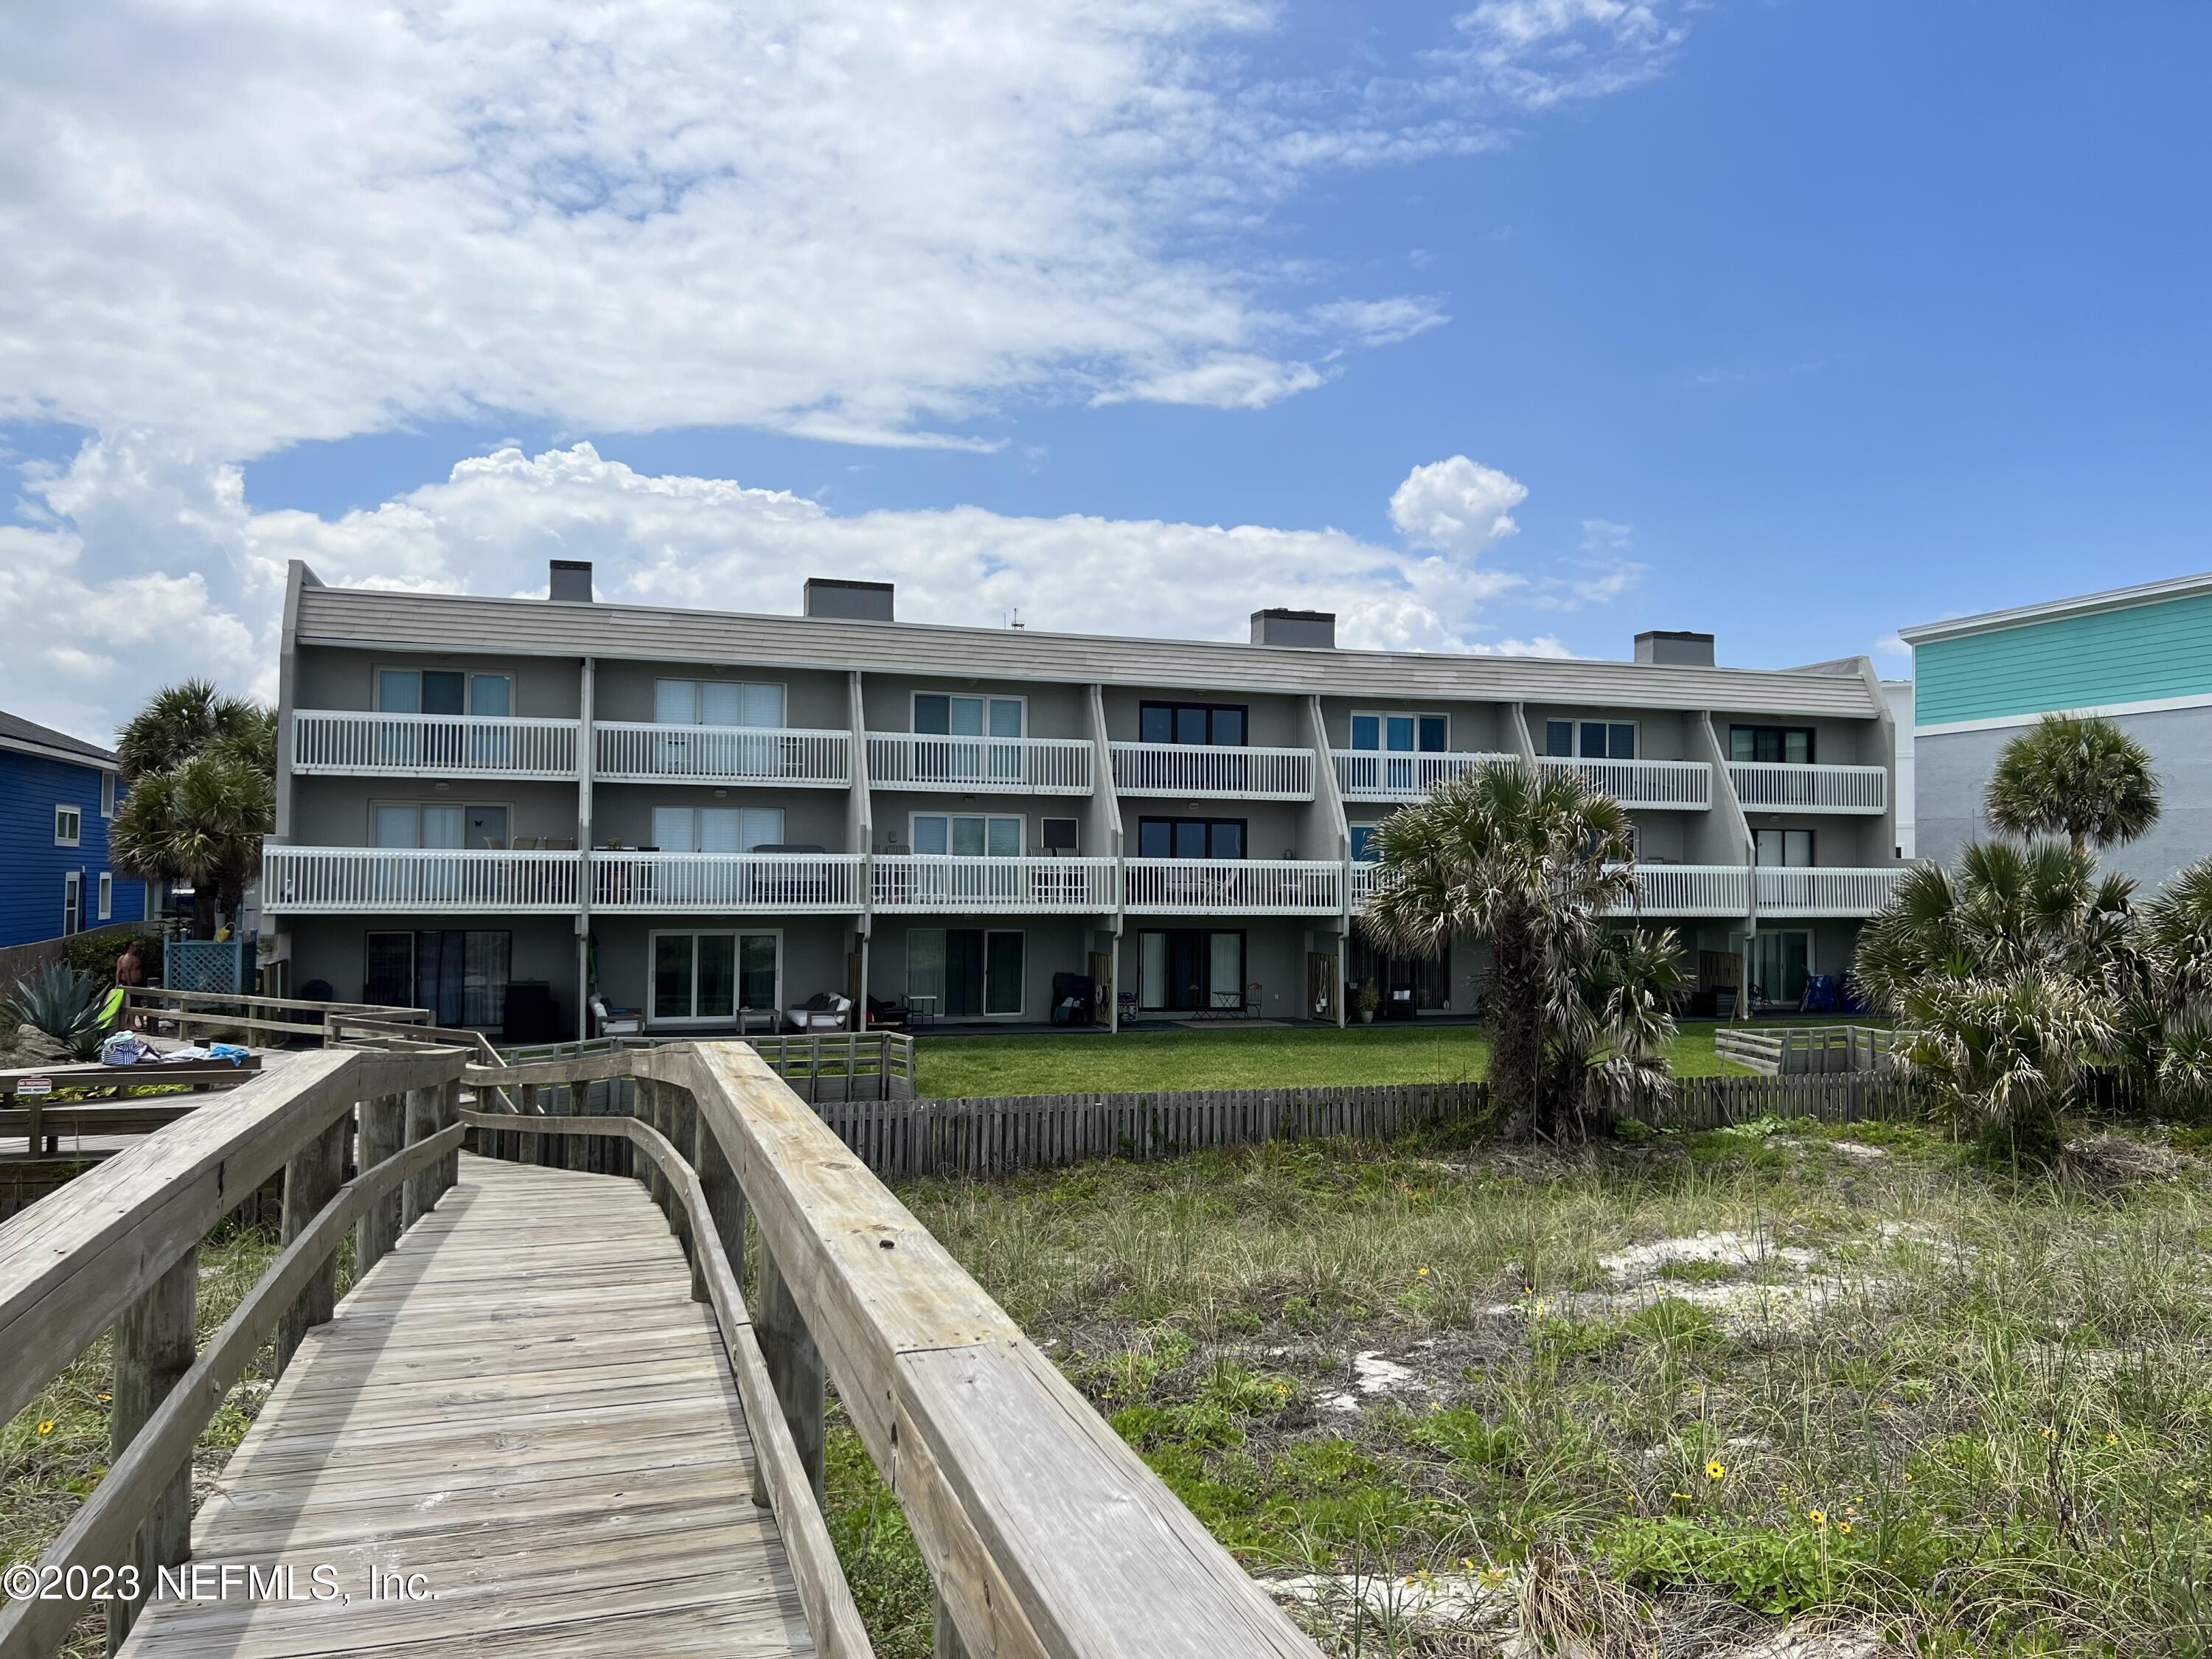 Jacksonville Beach, FL home for sale located at 1701 1st Street N Unit 1B, Jacksonville Beach, FL 32250